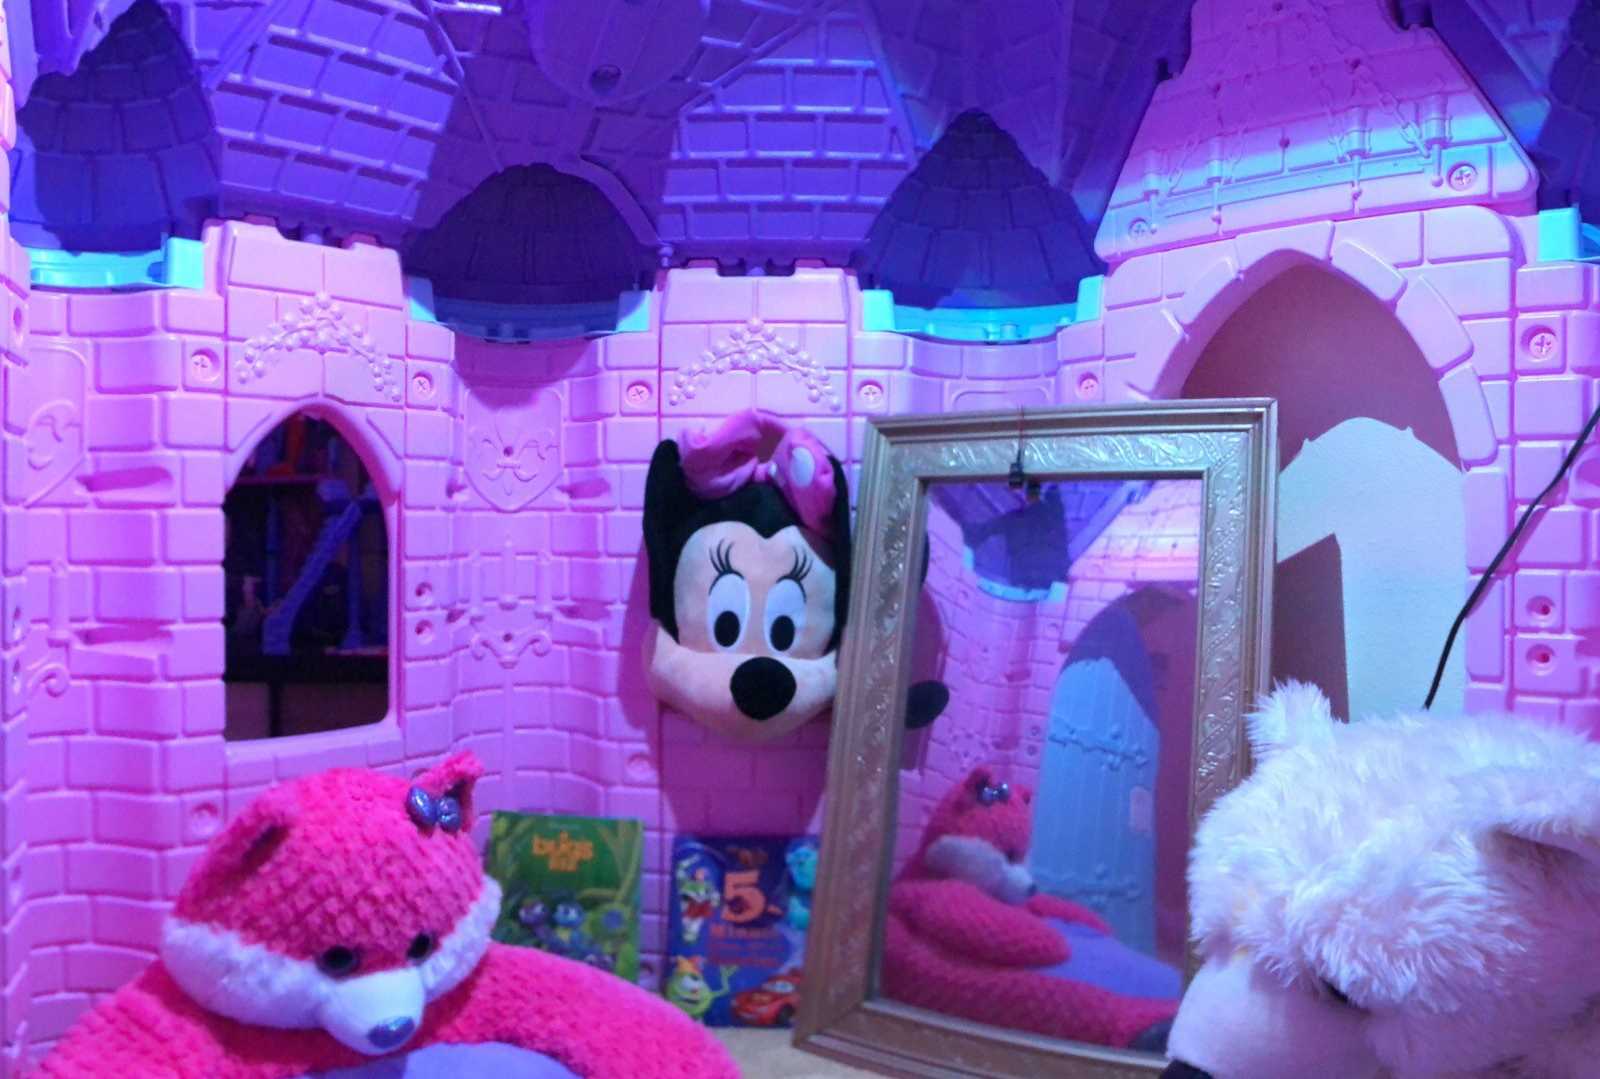 Inside of little girl's castle with stuffed animals and Minnie Mouse, books, and mirror